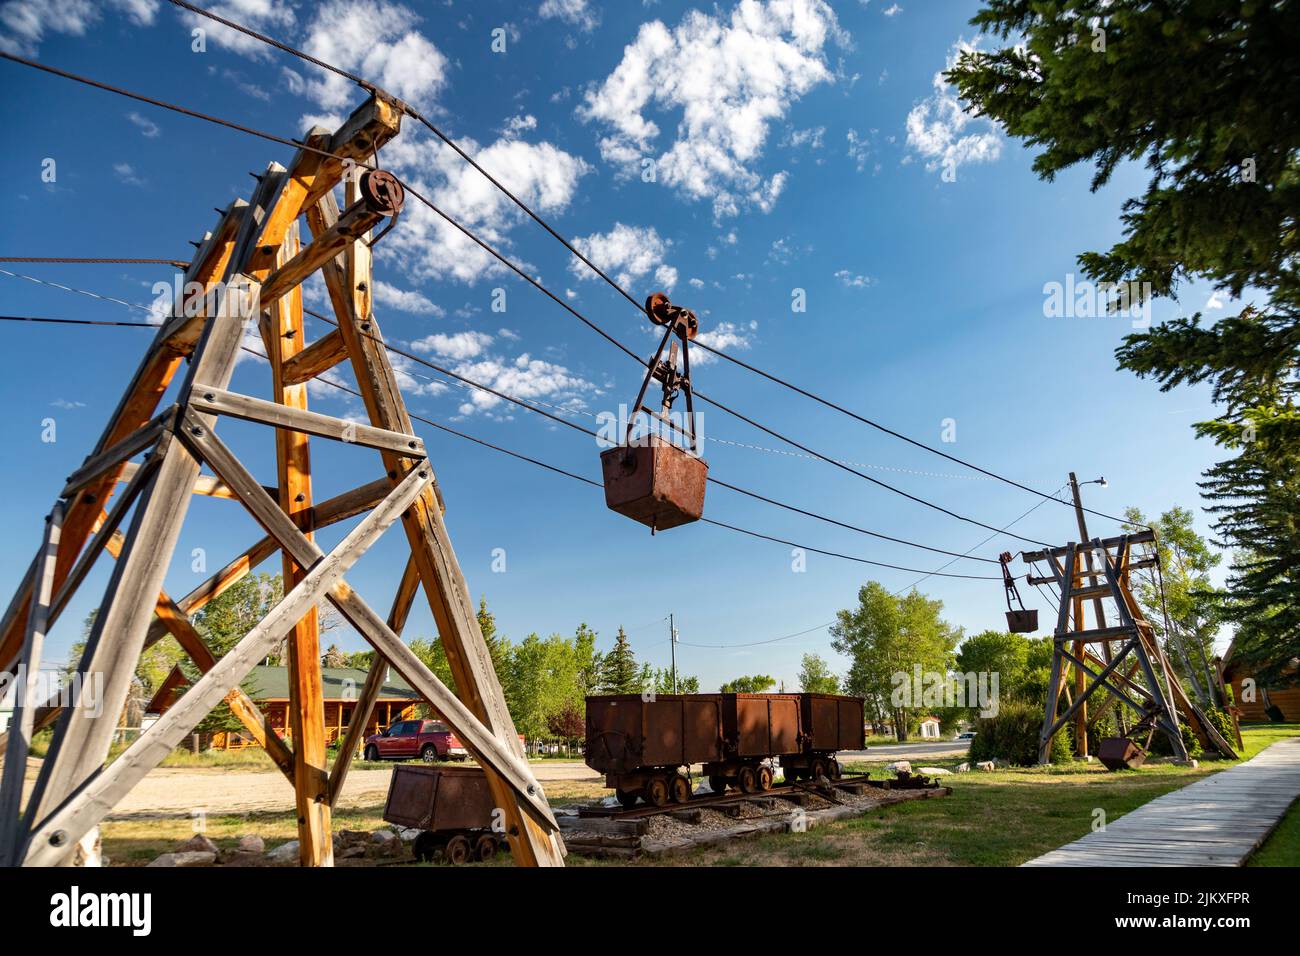 Encampment, Wyoming - The Grand Encampment Museum highlights the mining, ranching, and logging history of the town. A 16-mile aerial tramway, the long Stock Photo